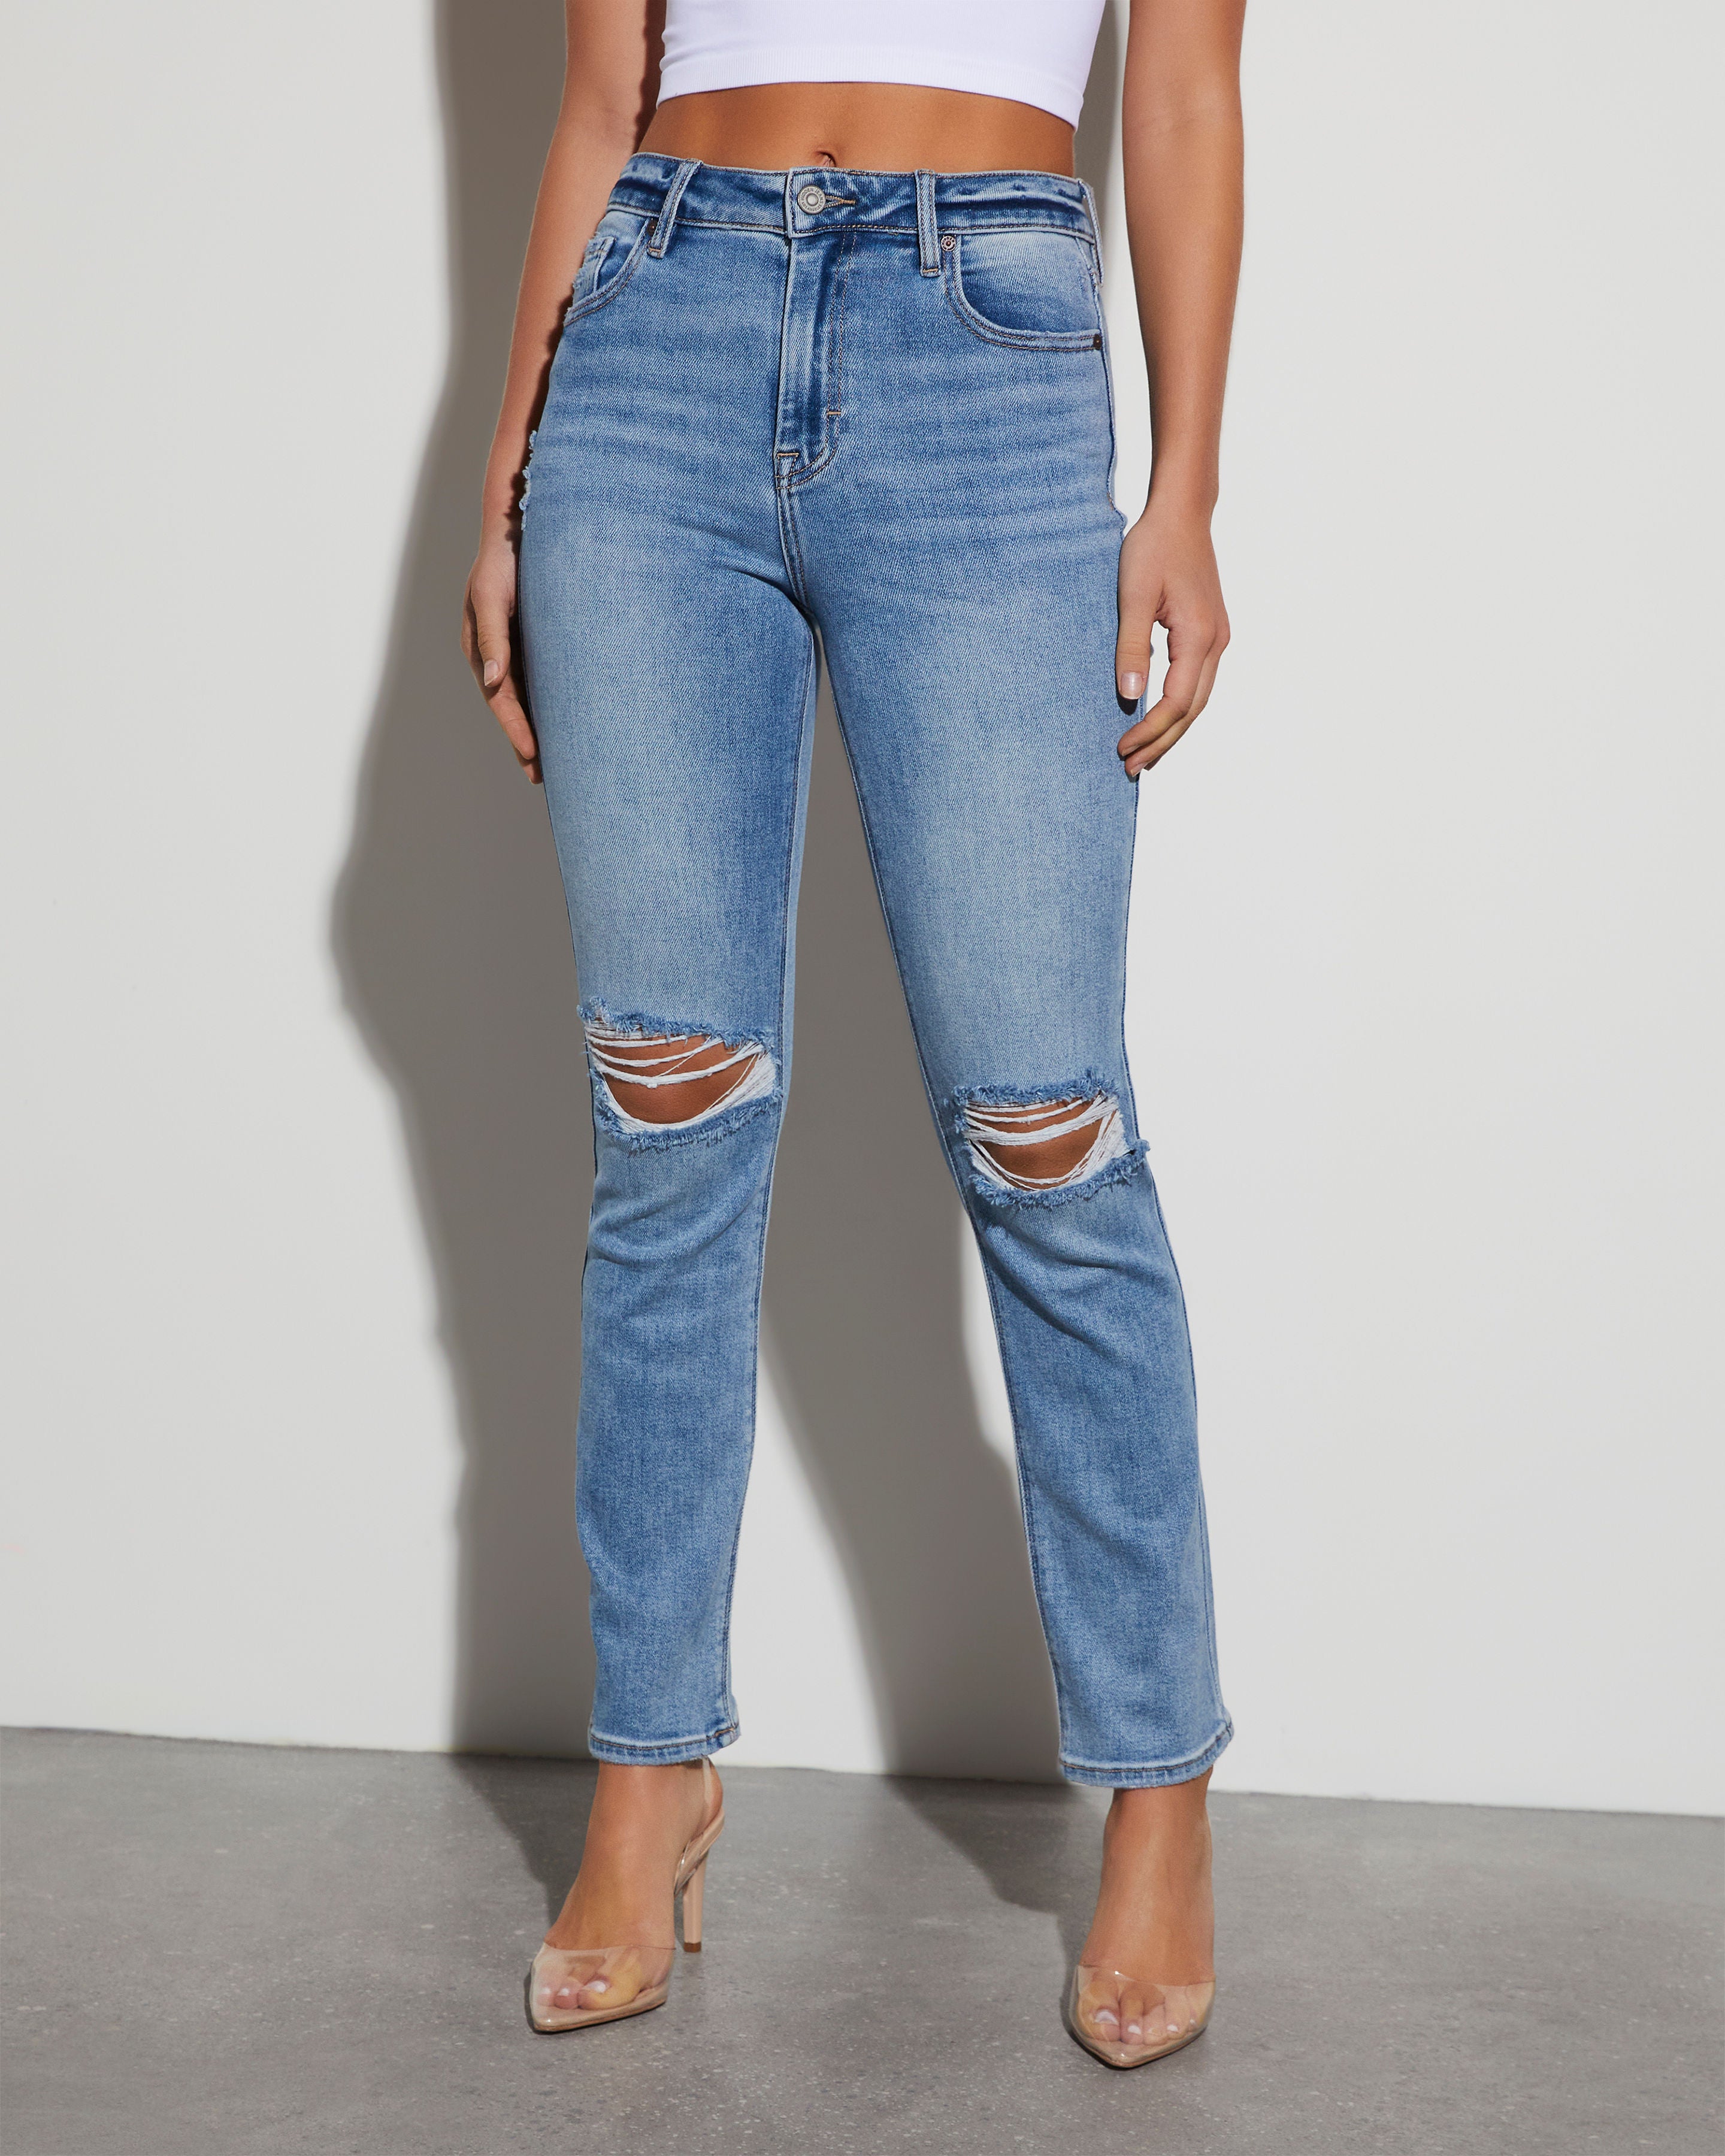 Ariana Distressed High Rise Skinny Jeans – VICI